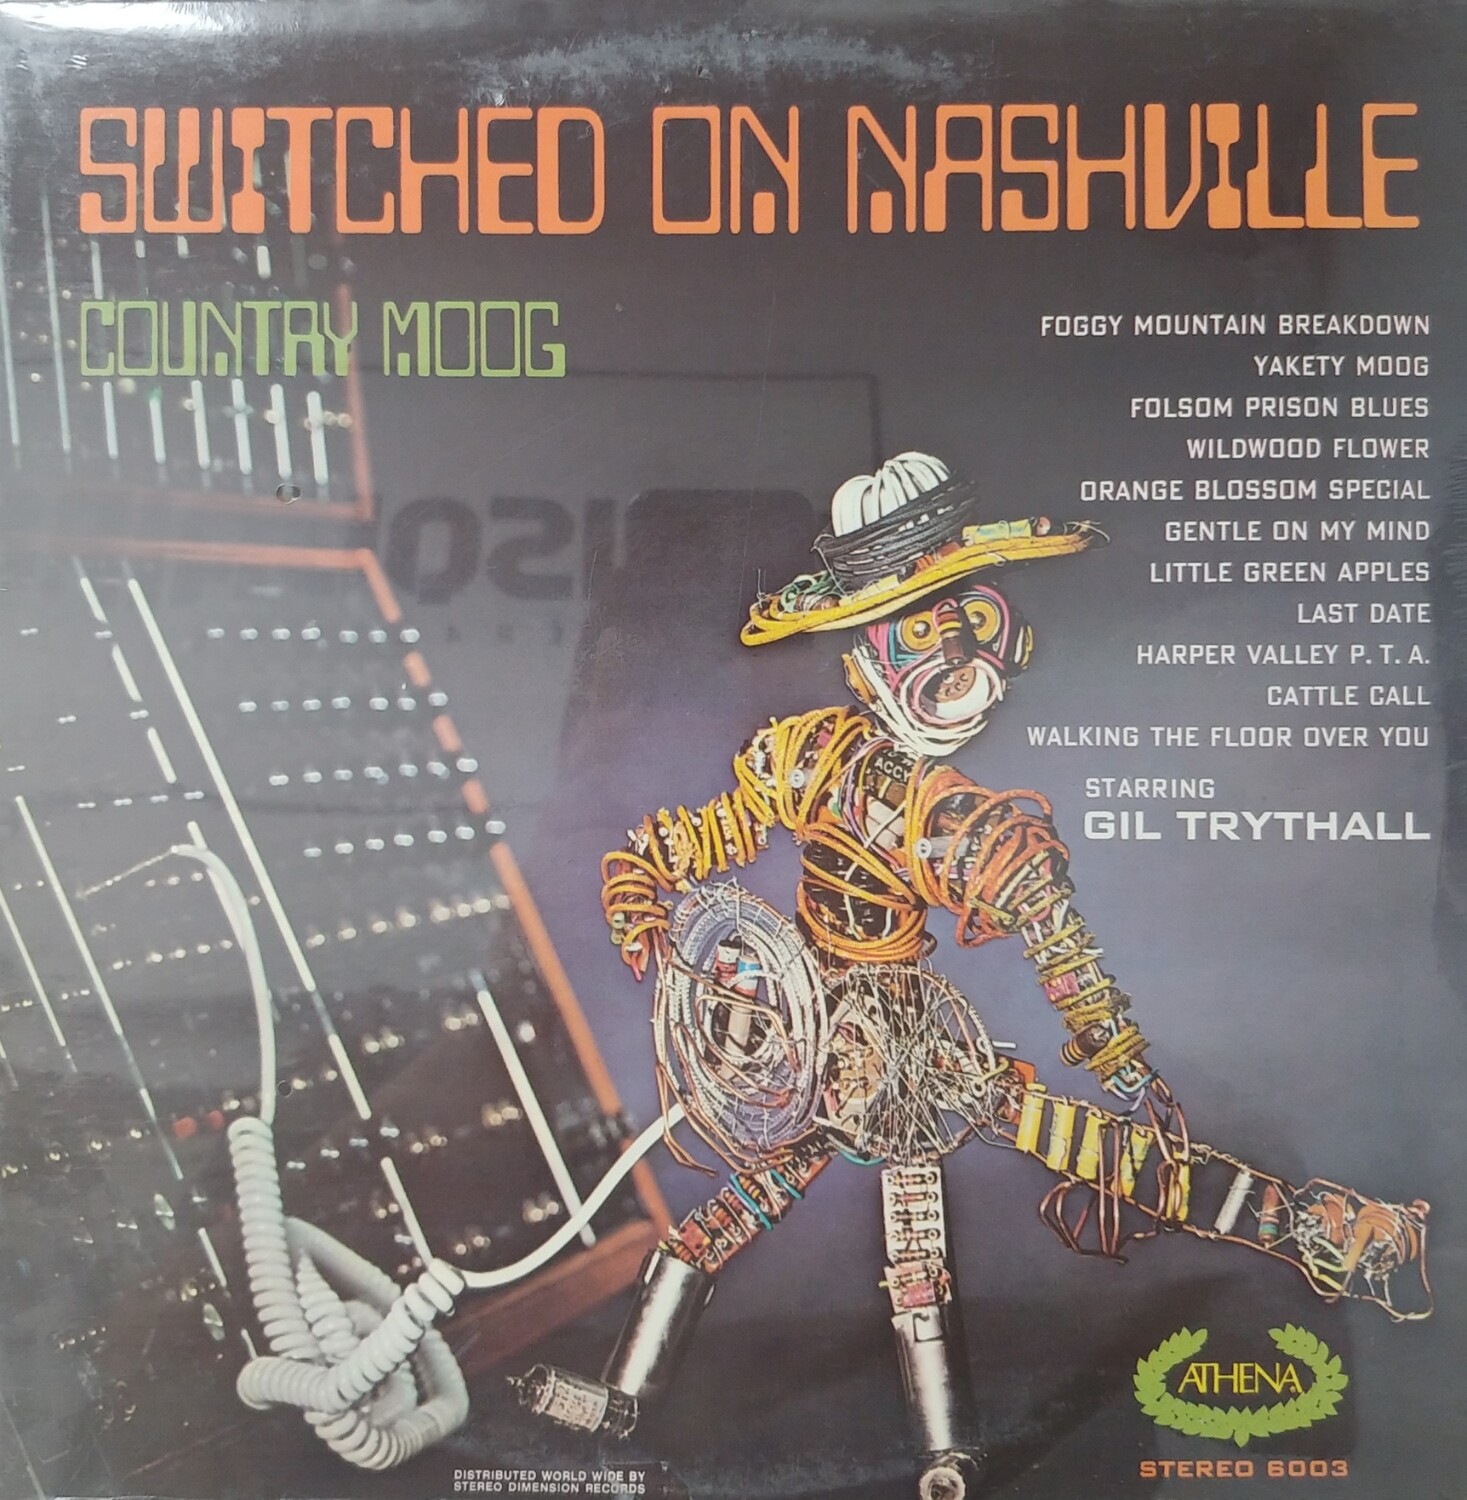 Gil Trythall - Switched on Nashville (Country Moog)